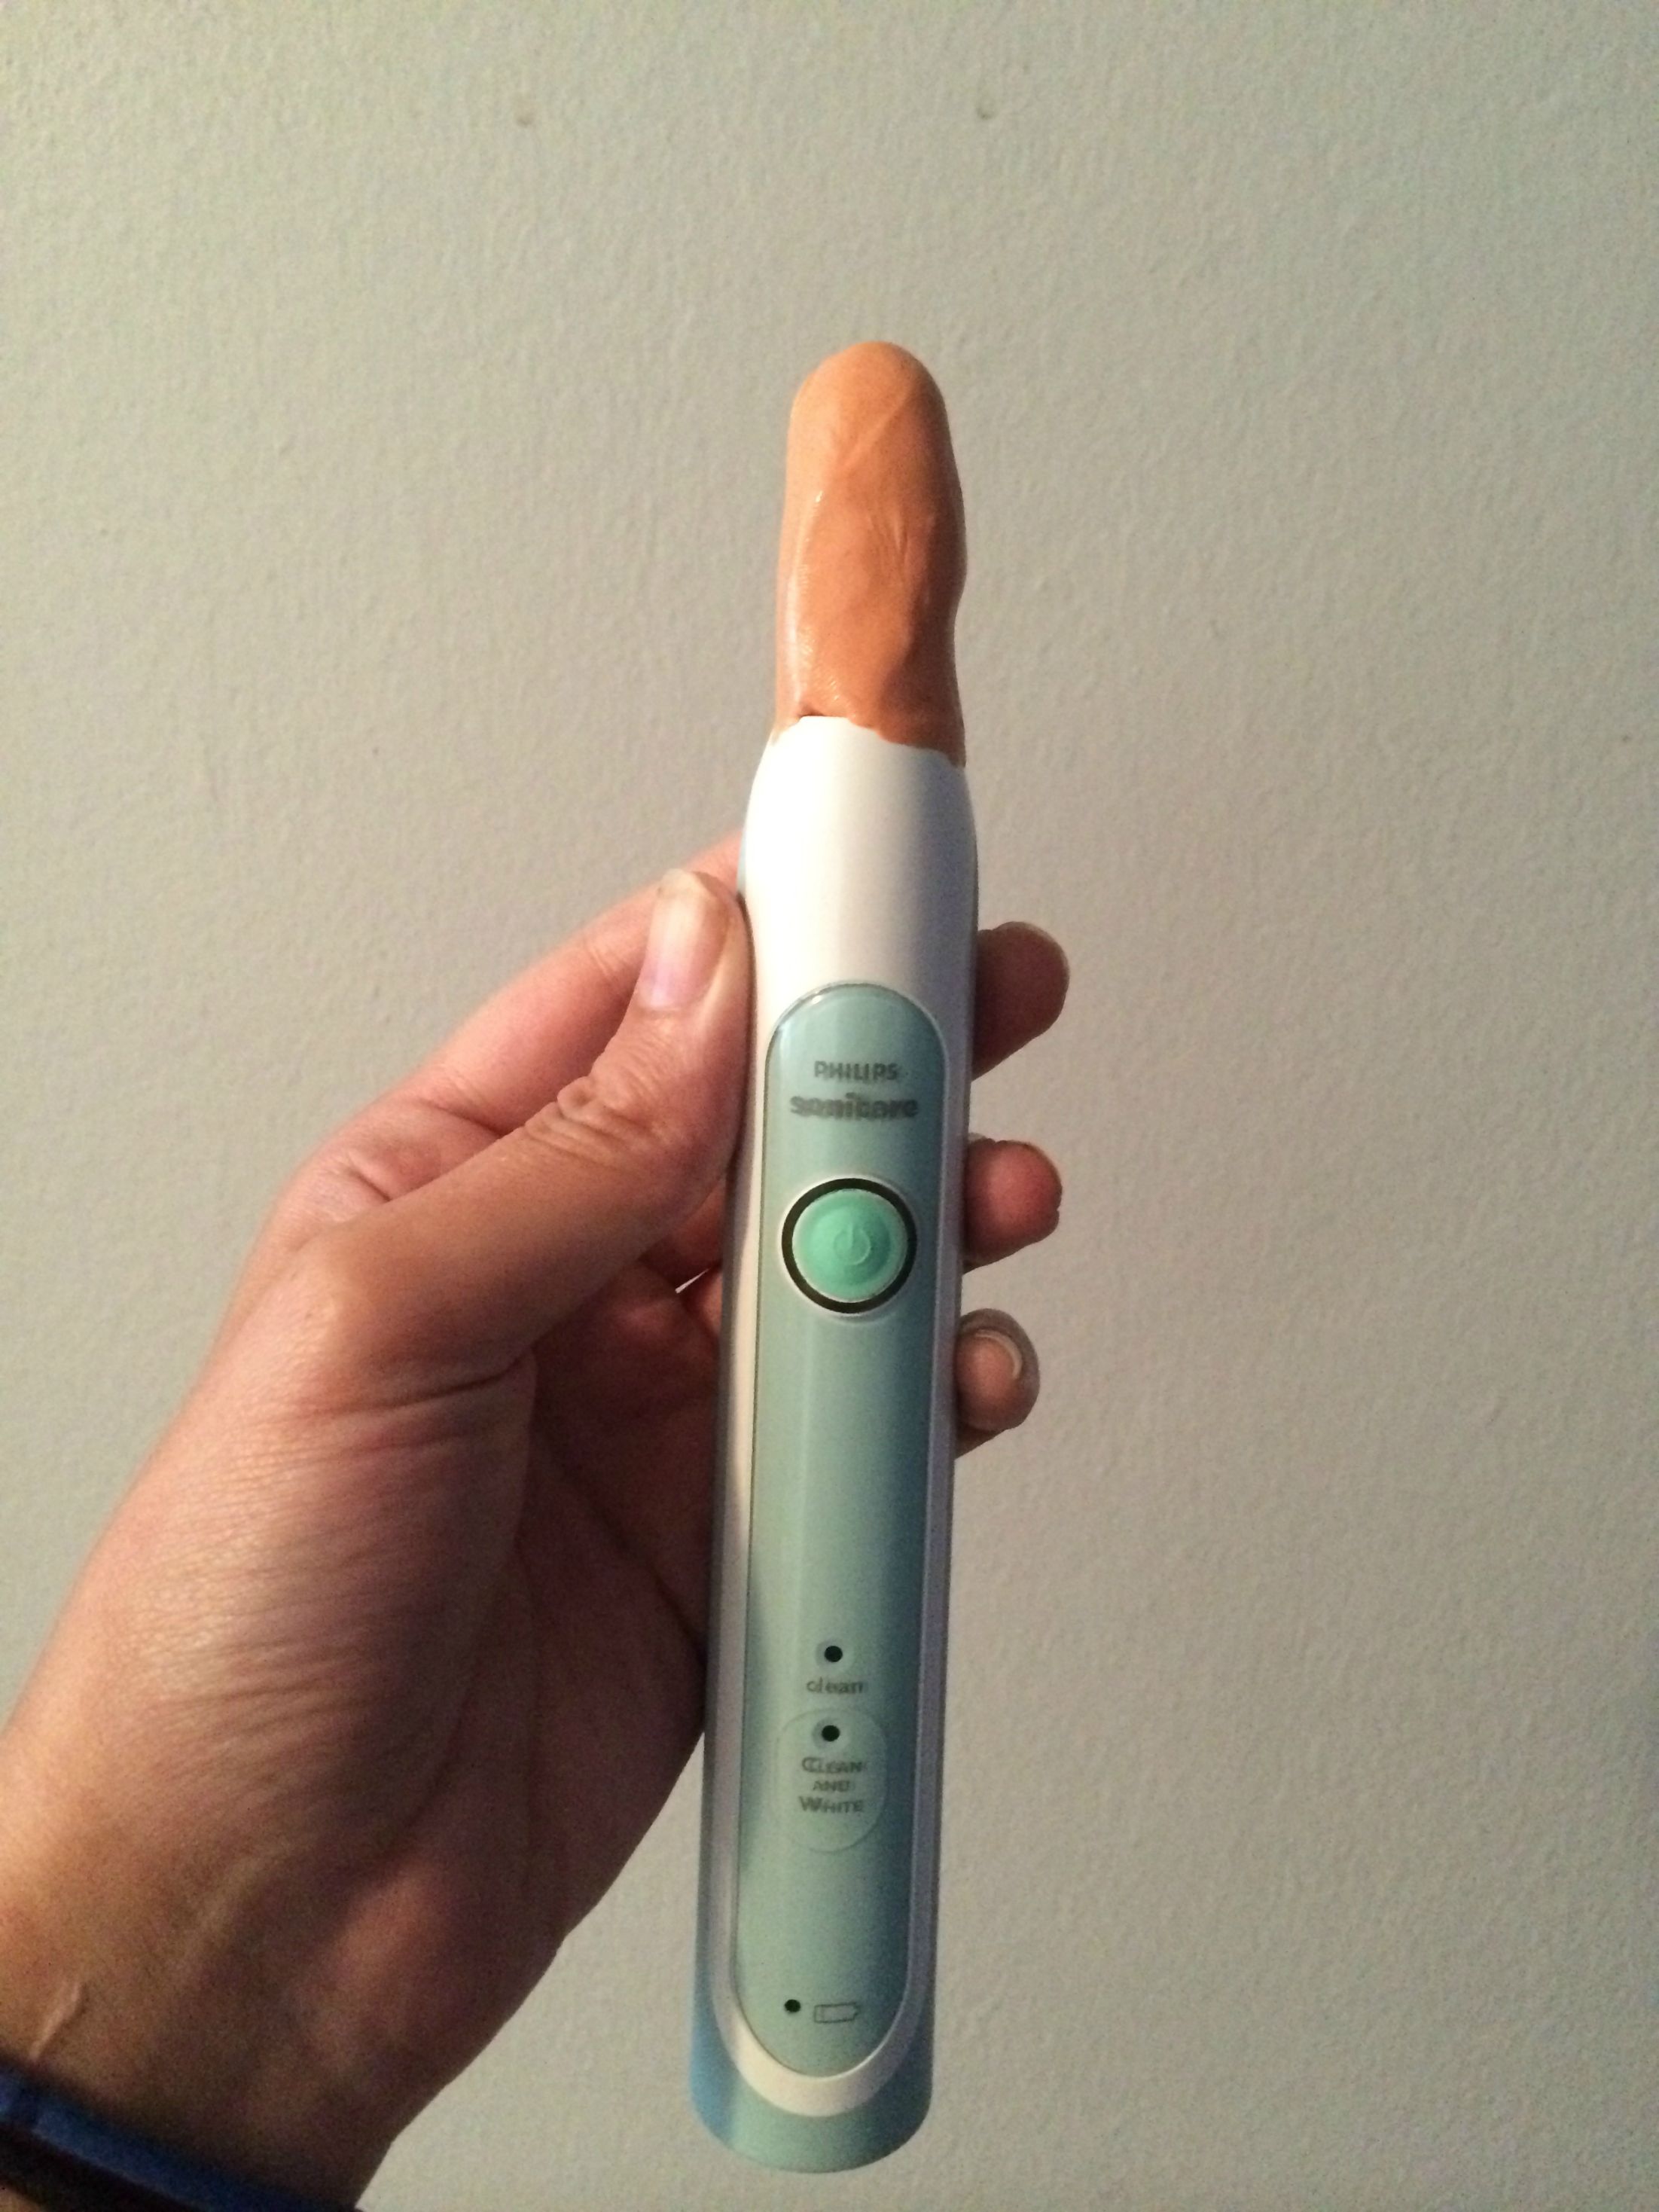 Frugal Couple Use Their Mad DIY Skills to Make a Vibrator With a Hot ... photo